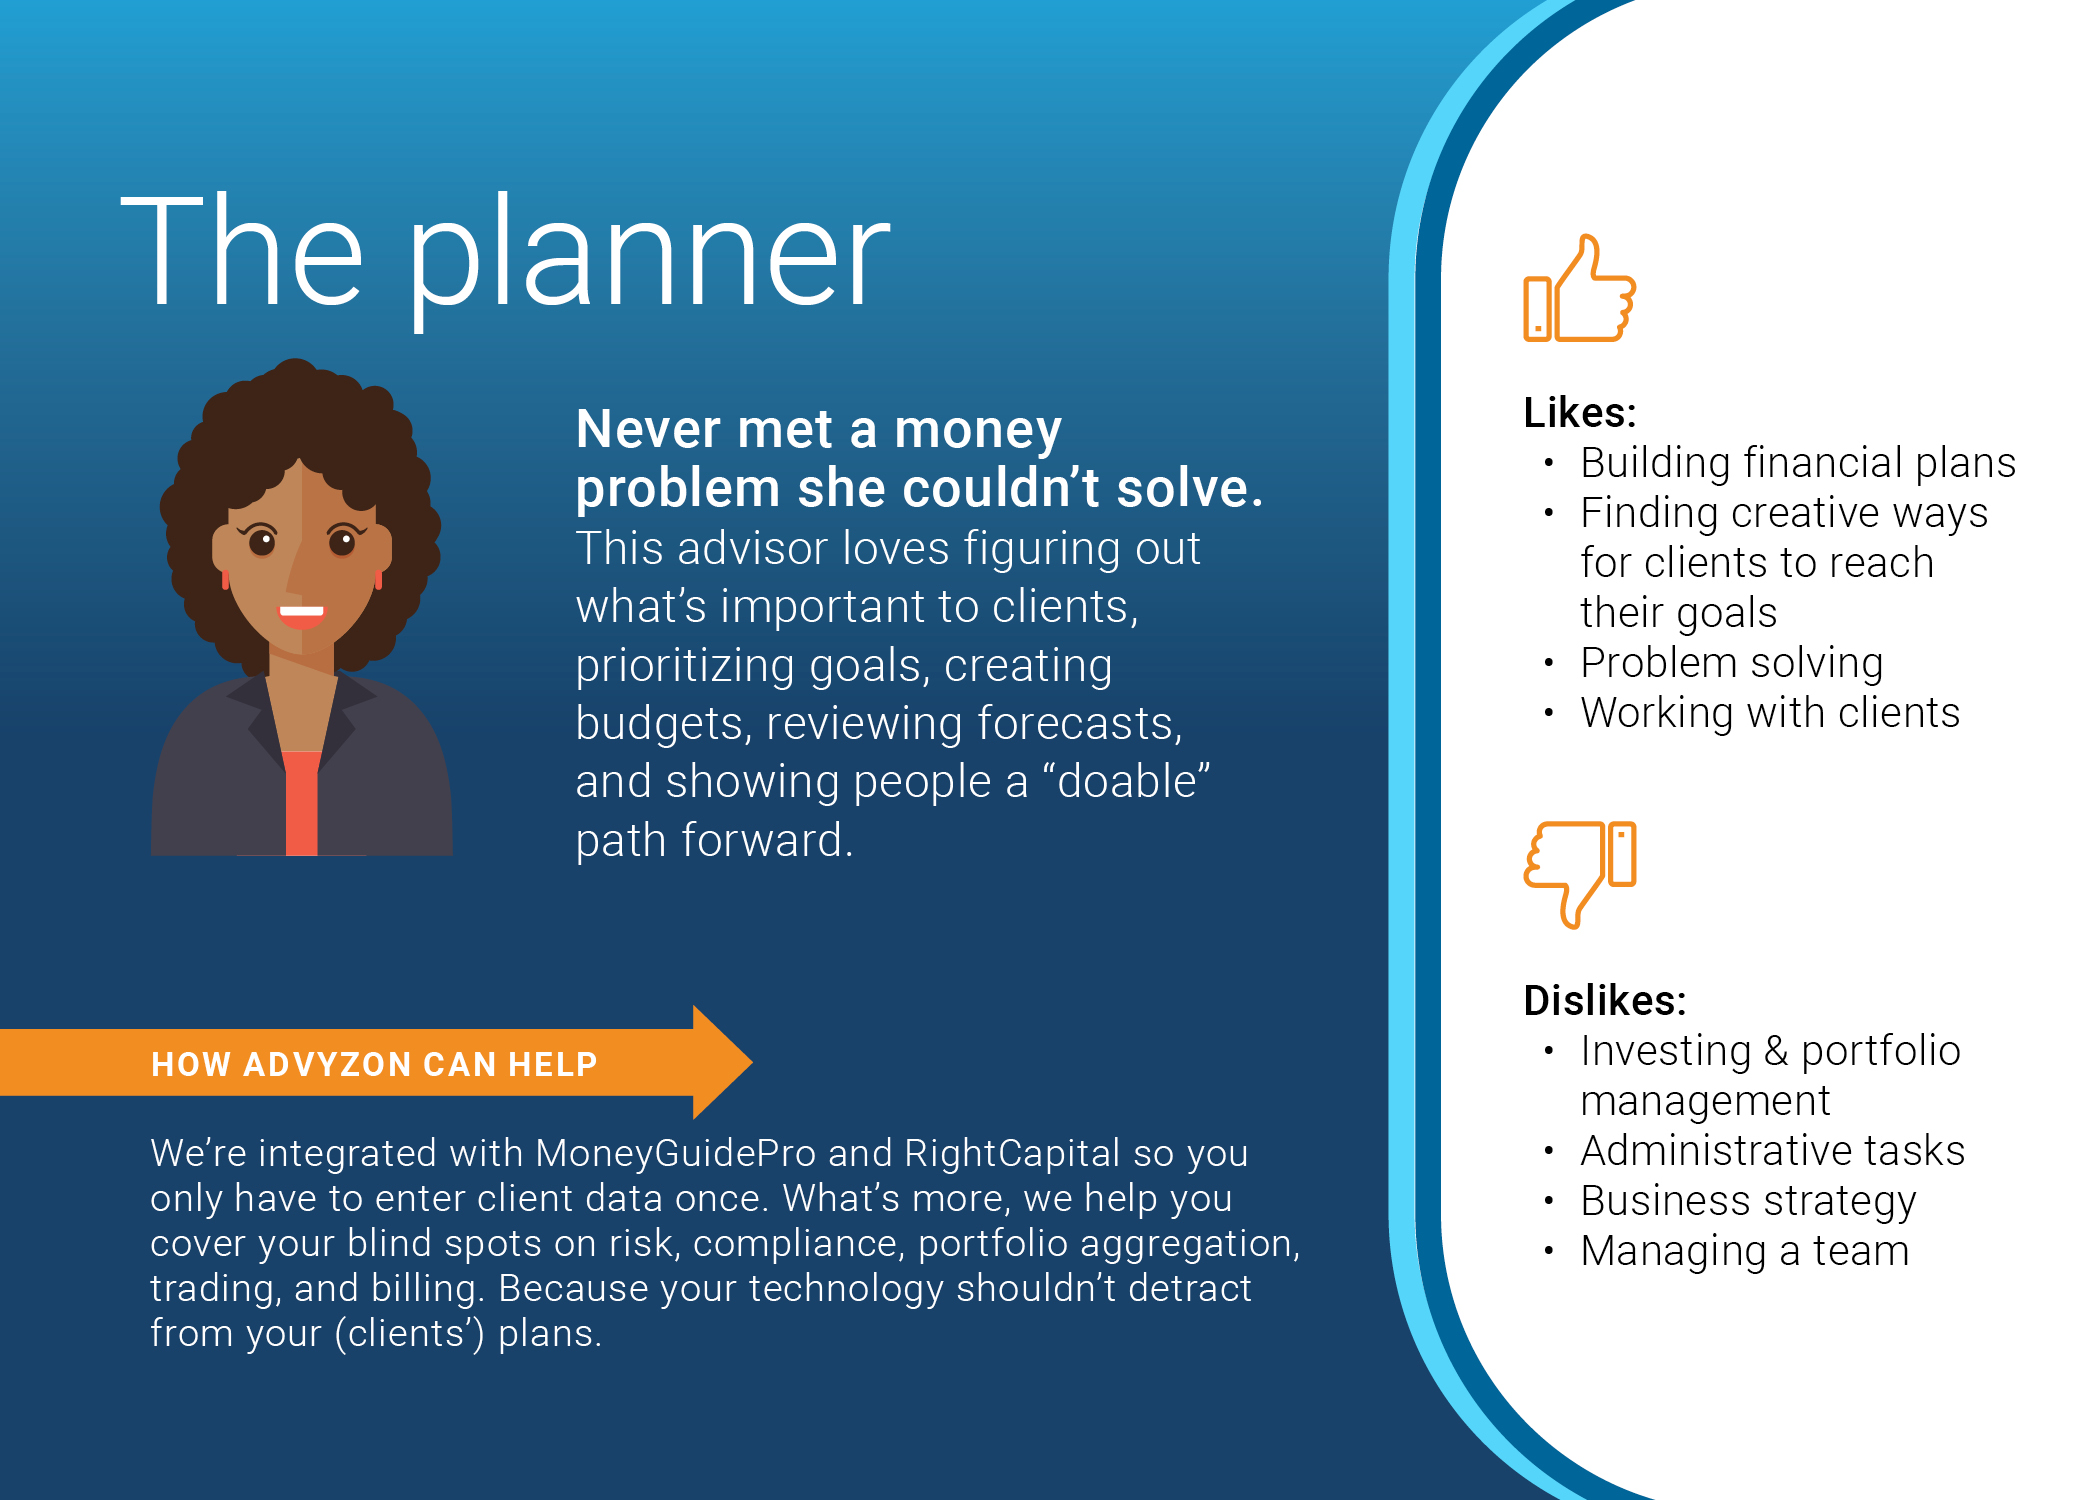 The planner
Never met a money problem she couldn’t solve. This advisor loves figuring out what’s important to clients, prioritizing goals, creating budgets, reviewing forecasts, and showing people a “doable” path forward. Likes:
    • Building financial plans
    • Finding creative ways for clients to reach their goals
    • Problem solving
    • Working with clients
Dislikes:
    • Investing & portfolio management
    • Administrative tasks
    • Business strategy
    • Managing a team
How Advyzon can help
We’re integrated with MoneyGuidePro and RightCapital so you only have to enter client data once. What’s more, we help you cover your blind spots on risk, compliance, portfolio aggregation, trading, and billing. Because your technology shouldn’t detract from your (clients’) plans.
